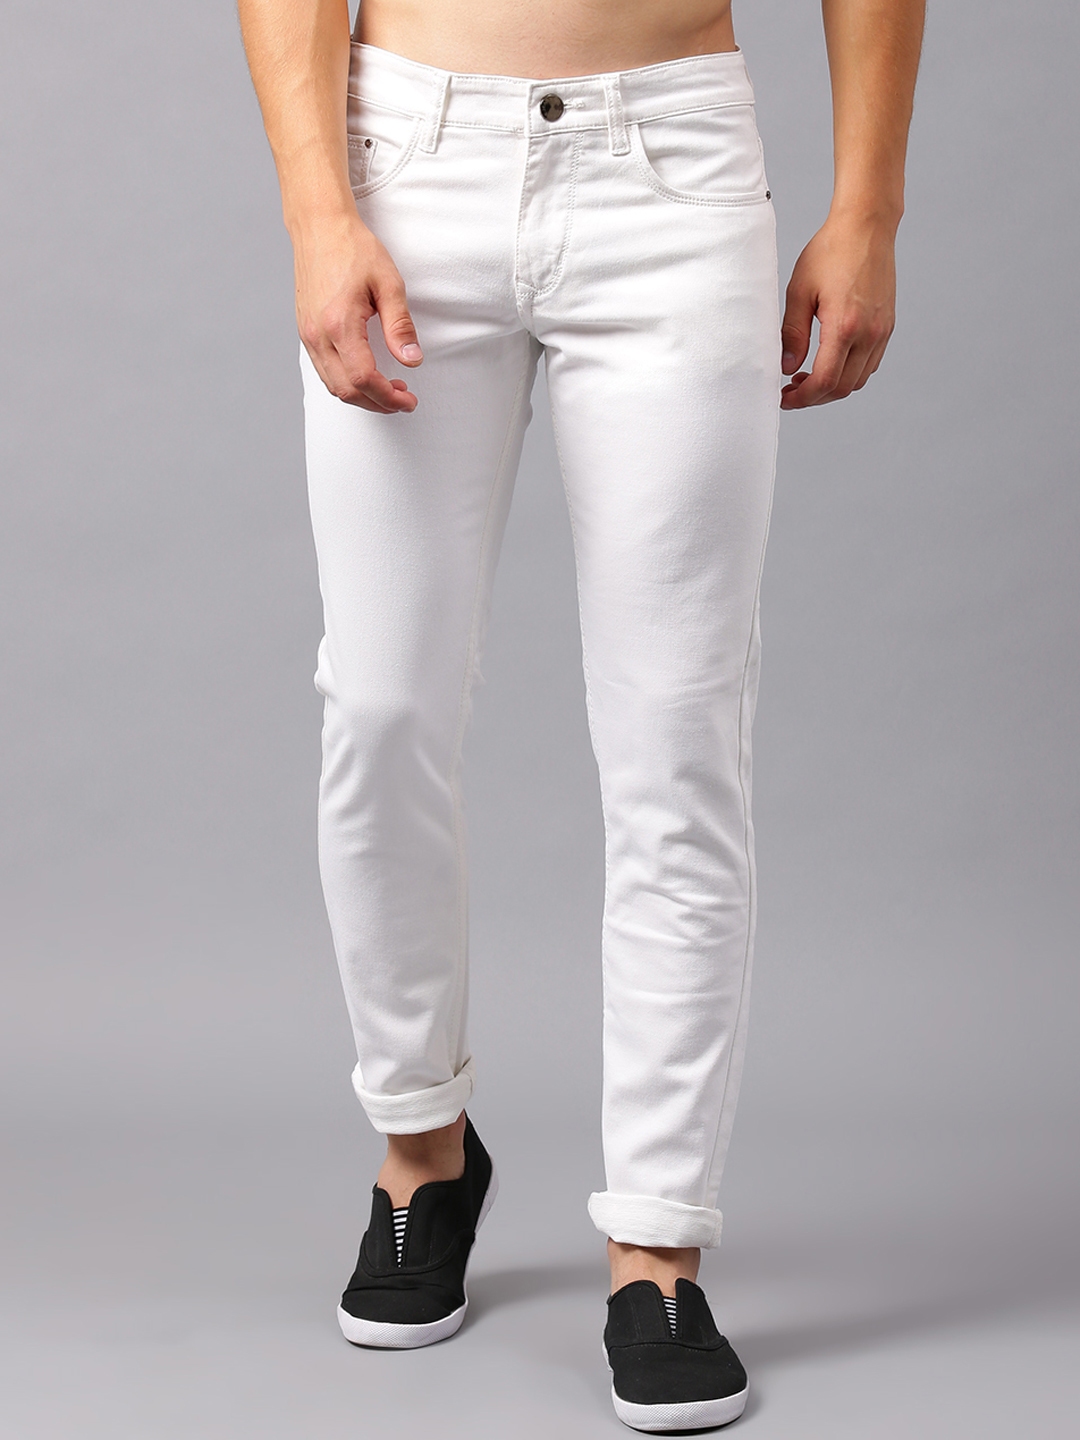 Buy Stylox Men White Slim Fit Mid Rise Clean Look Stretchable Jeans ...